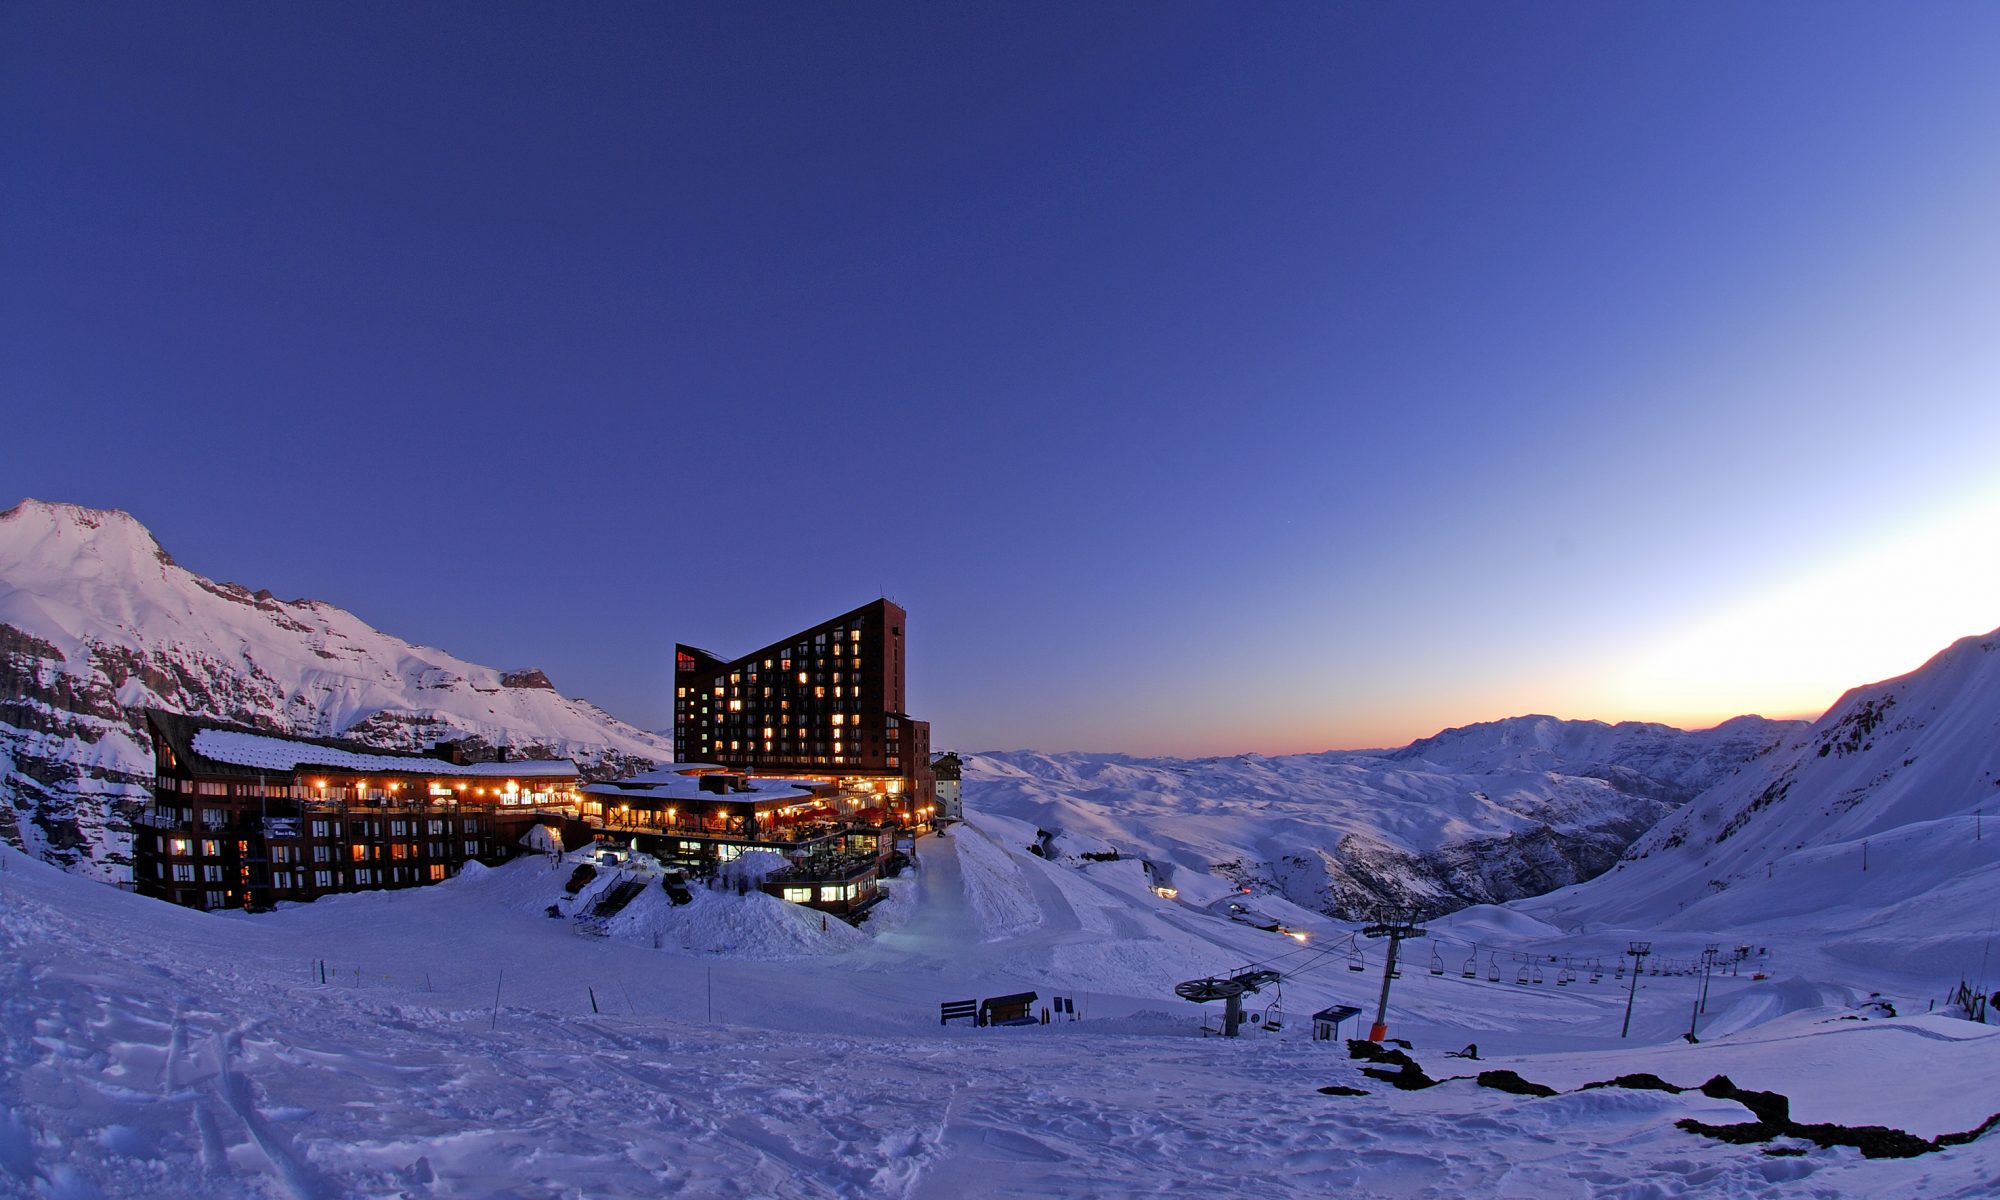 A Day Trip to Valle Nevado from Santiago City. Photo: Valle Nevado on a beautiful night.